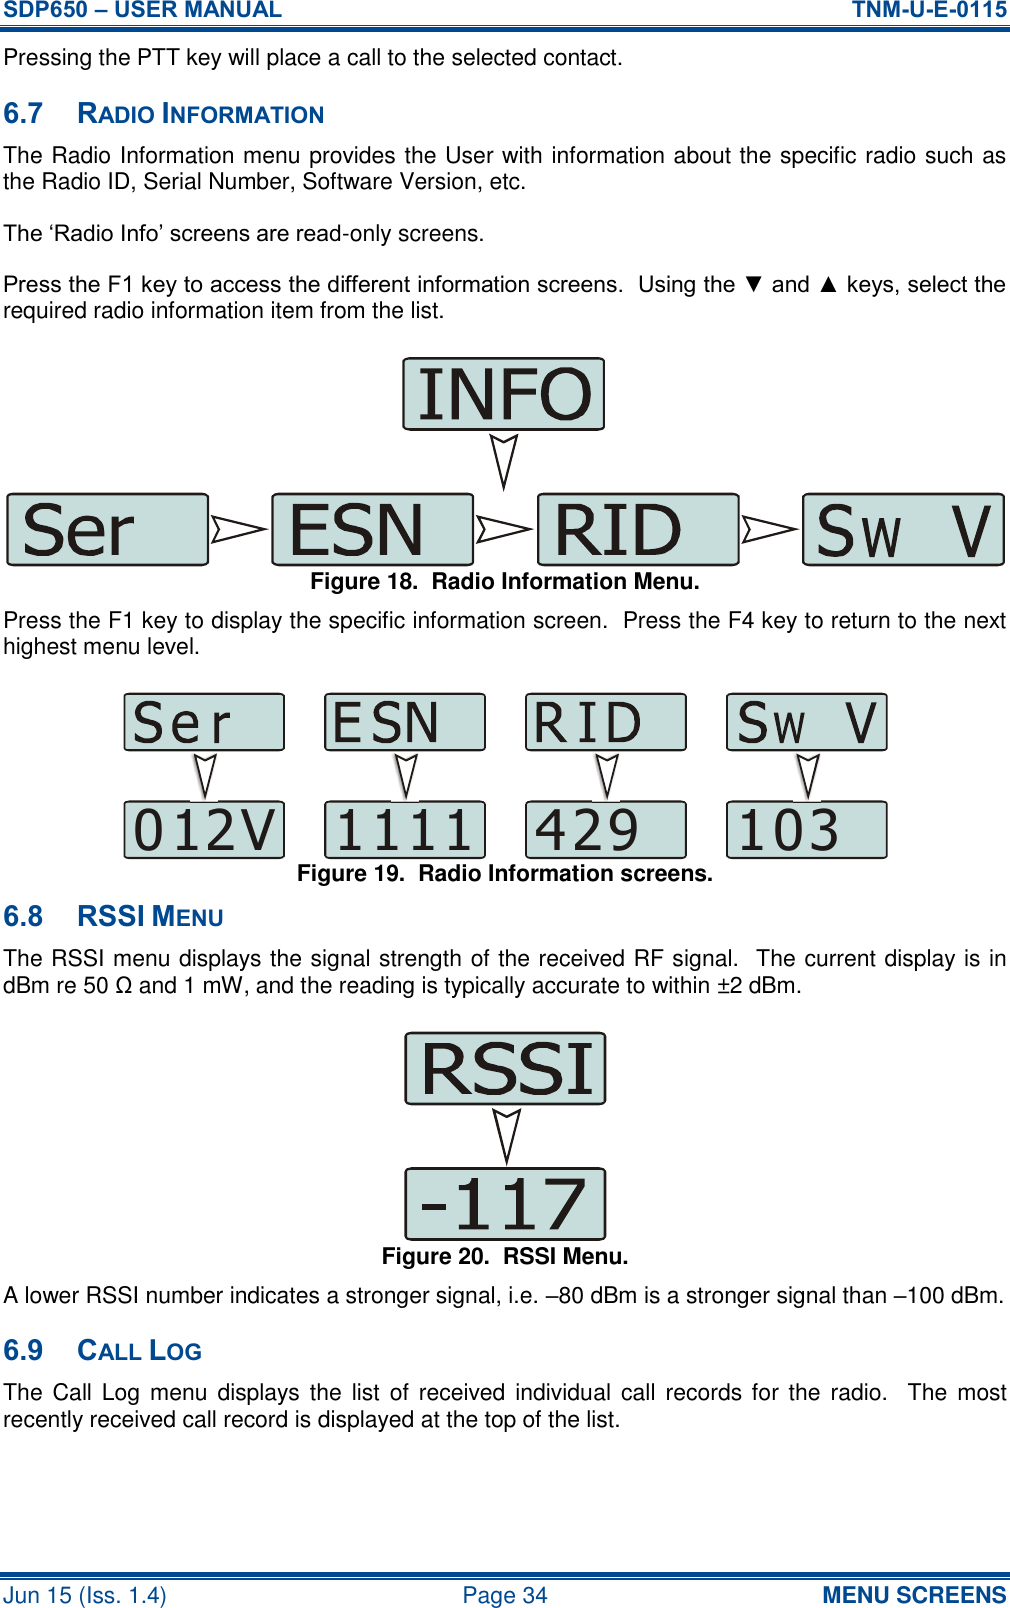 SDP650 – USER MANUAL  TNM-U-E-0115 Jun 15 (Iss. 1.4)  Page 34 MENU SCREENS Pressing the PTT key will place a call to the selected contact. 6.7 RADIO INFORMATION The Radio Information menu provides the User with information about the specific radio such as the Radio ID, Serial Number, Software Version, etc. The ‘Radio Info’ screens are read-only screens. Press the F1 key to access the different information screens.  Using the ▼ and ▲ keys, select the required radio information item from the list. Figure 18.  Radio Information Menu. Press the F1 key to display the specific information screen.  Press the F4 key to return to the next highest menu level. Figure 19.  Radio Information screens. 6.8 RSSI MENU The RSSI menu displays the signal strength of the received RF signal.  The current display is in dBm re 50 Ω and 1 mW, and the reading is typically accurate to within ±2 dBm.  Figure 20.  RSSI Menu. A lower RSSI number indicates a stronger signal, i.e. –80 dBm is a stronger signal than –100 dBm. 6.9 CALL LOG The  Call  Log menu displays the  list of  received individual  call  records for  the  radio.   The most recently received call record is displayed at the top of the list. 012V 1111 429 103